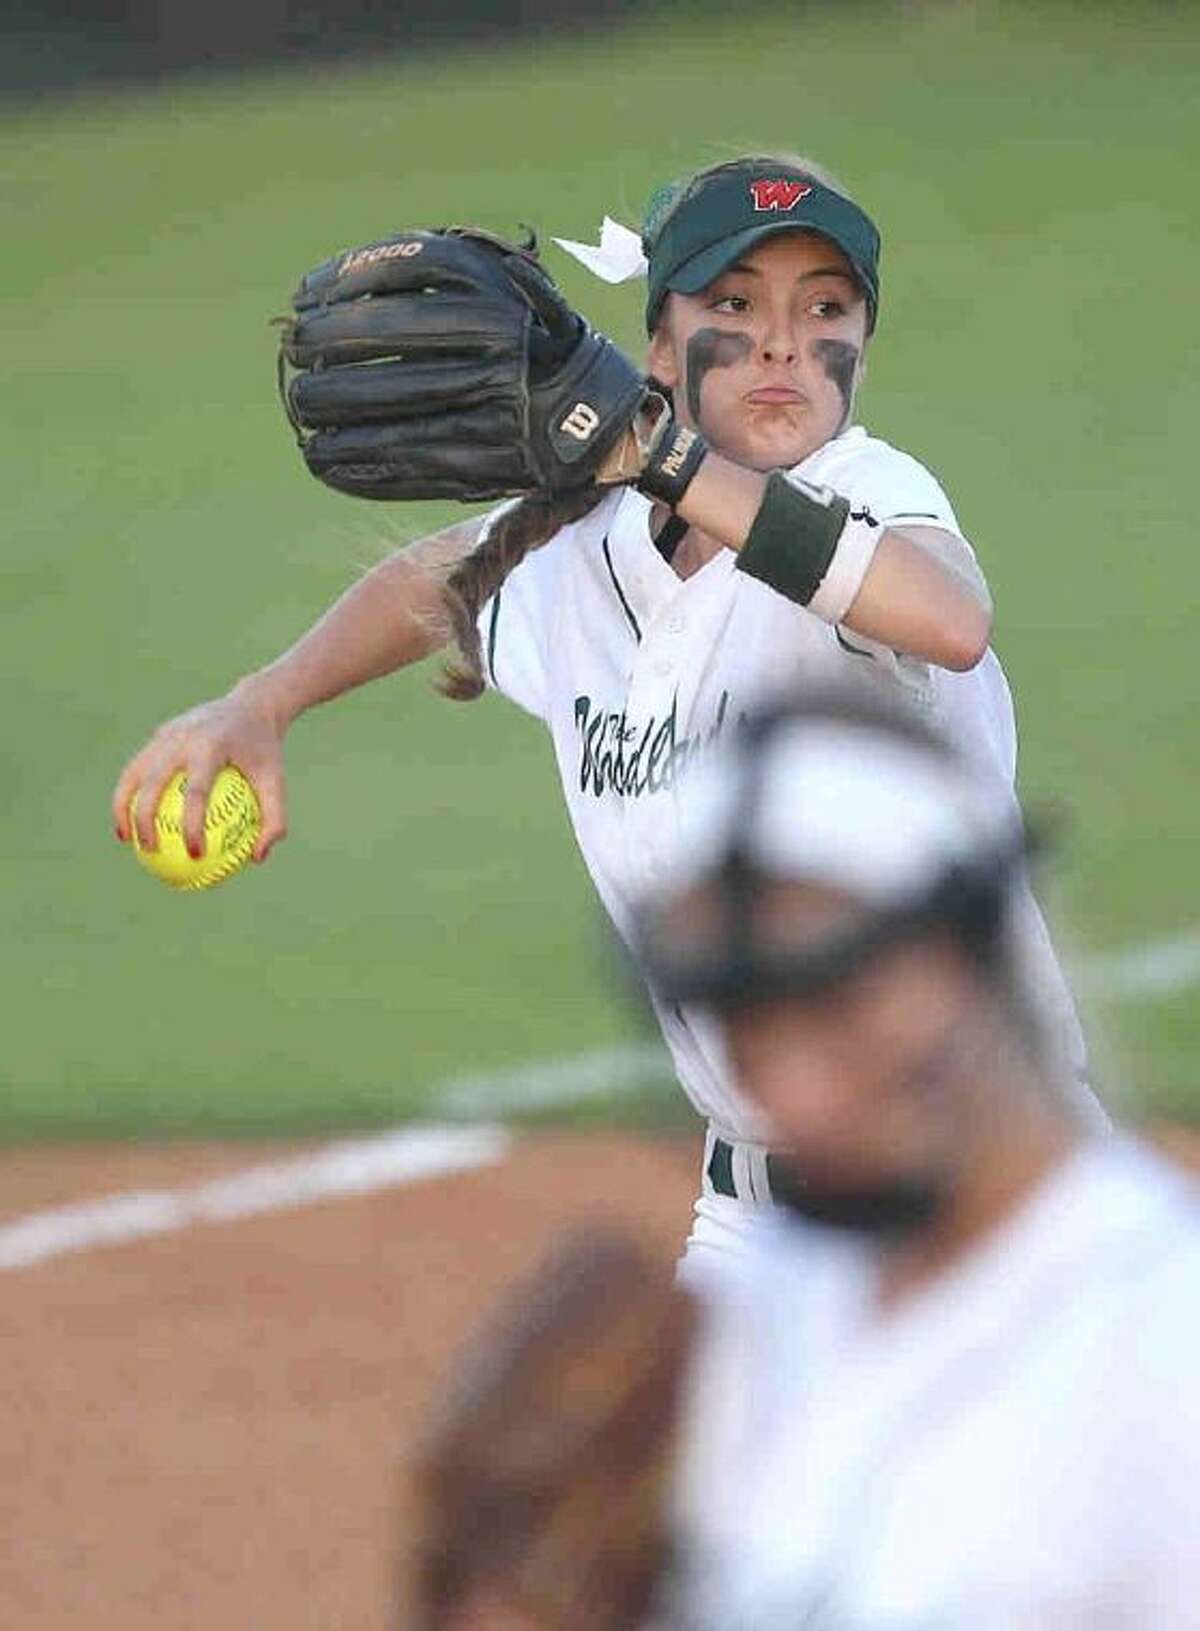 The Woodlands third baseman Kaitlyn Stavinoha throws to first during a high school softball game Tuesday. The Woodlands defeated College Park 3-1. To view or purchase this photo and others like it, visit HCNpics.com.